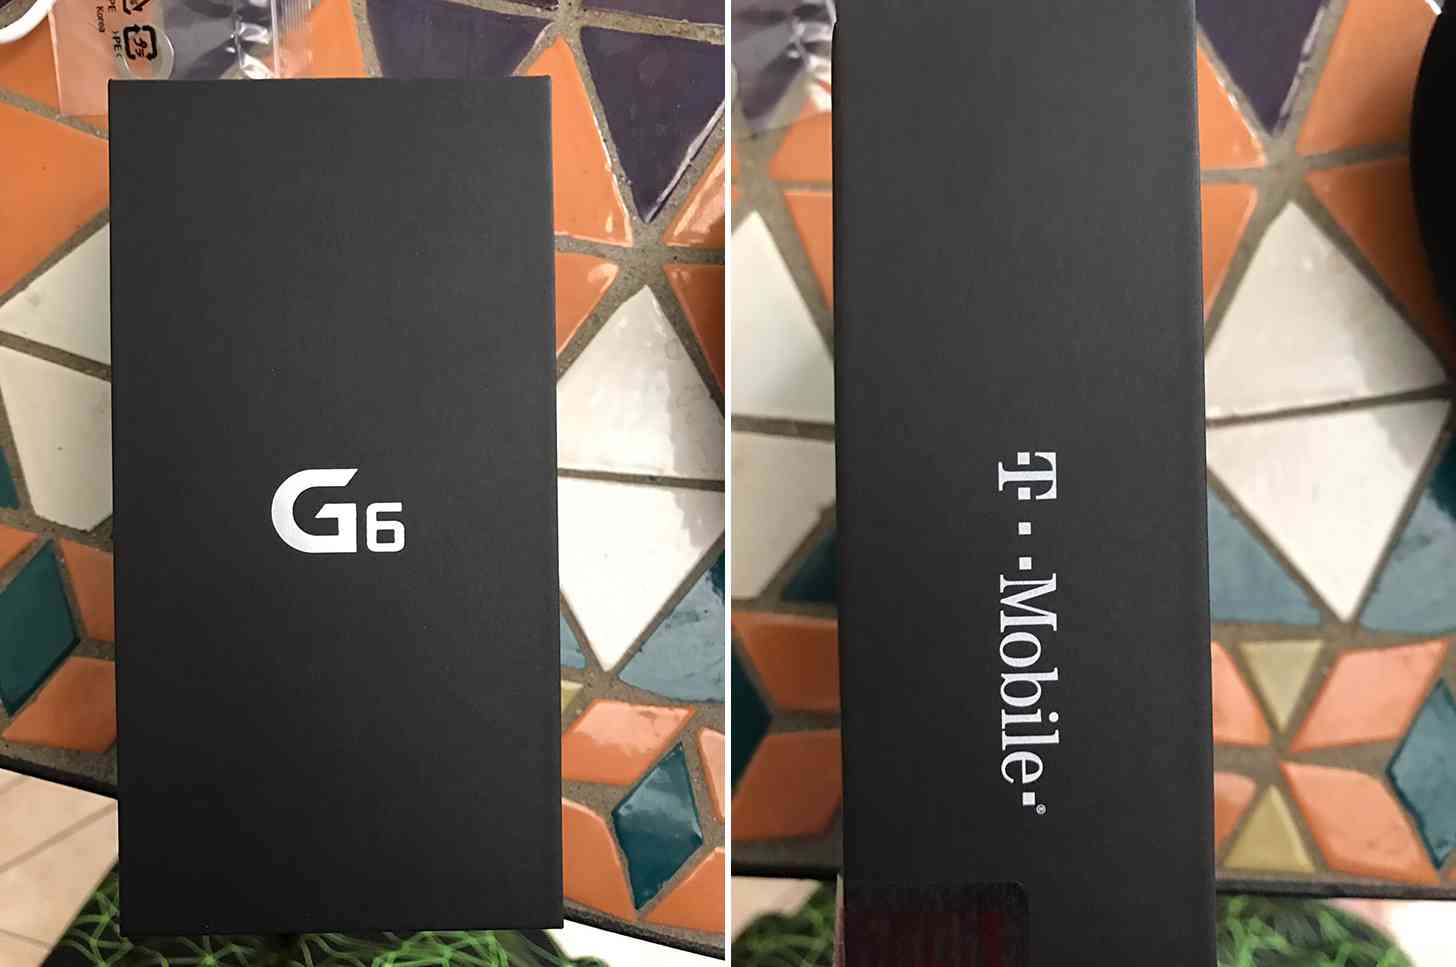 T-Mobile LG G6 early delivery